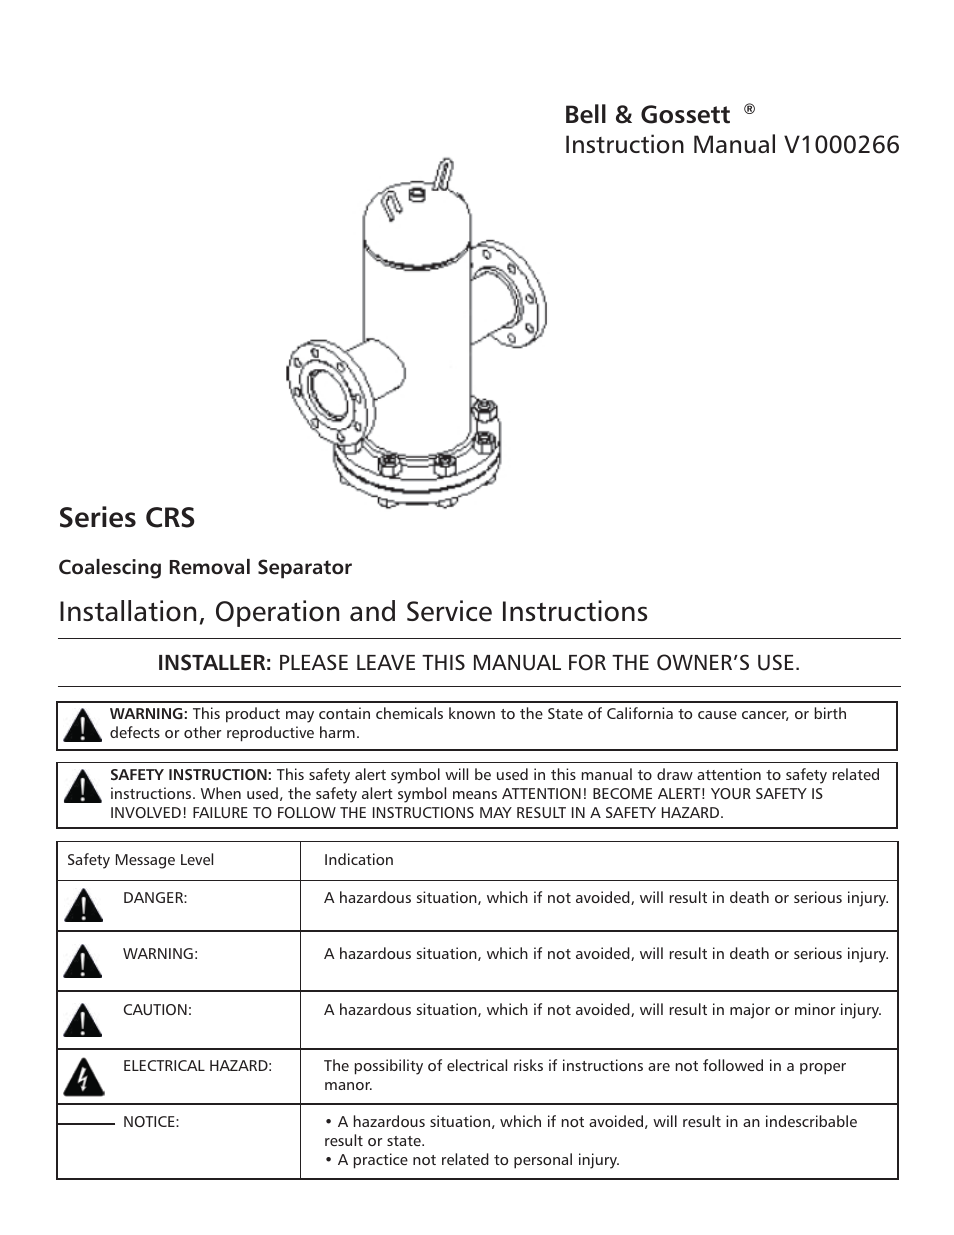 V1000266 Series CRS Coalescing Removal Separator